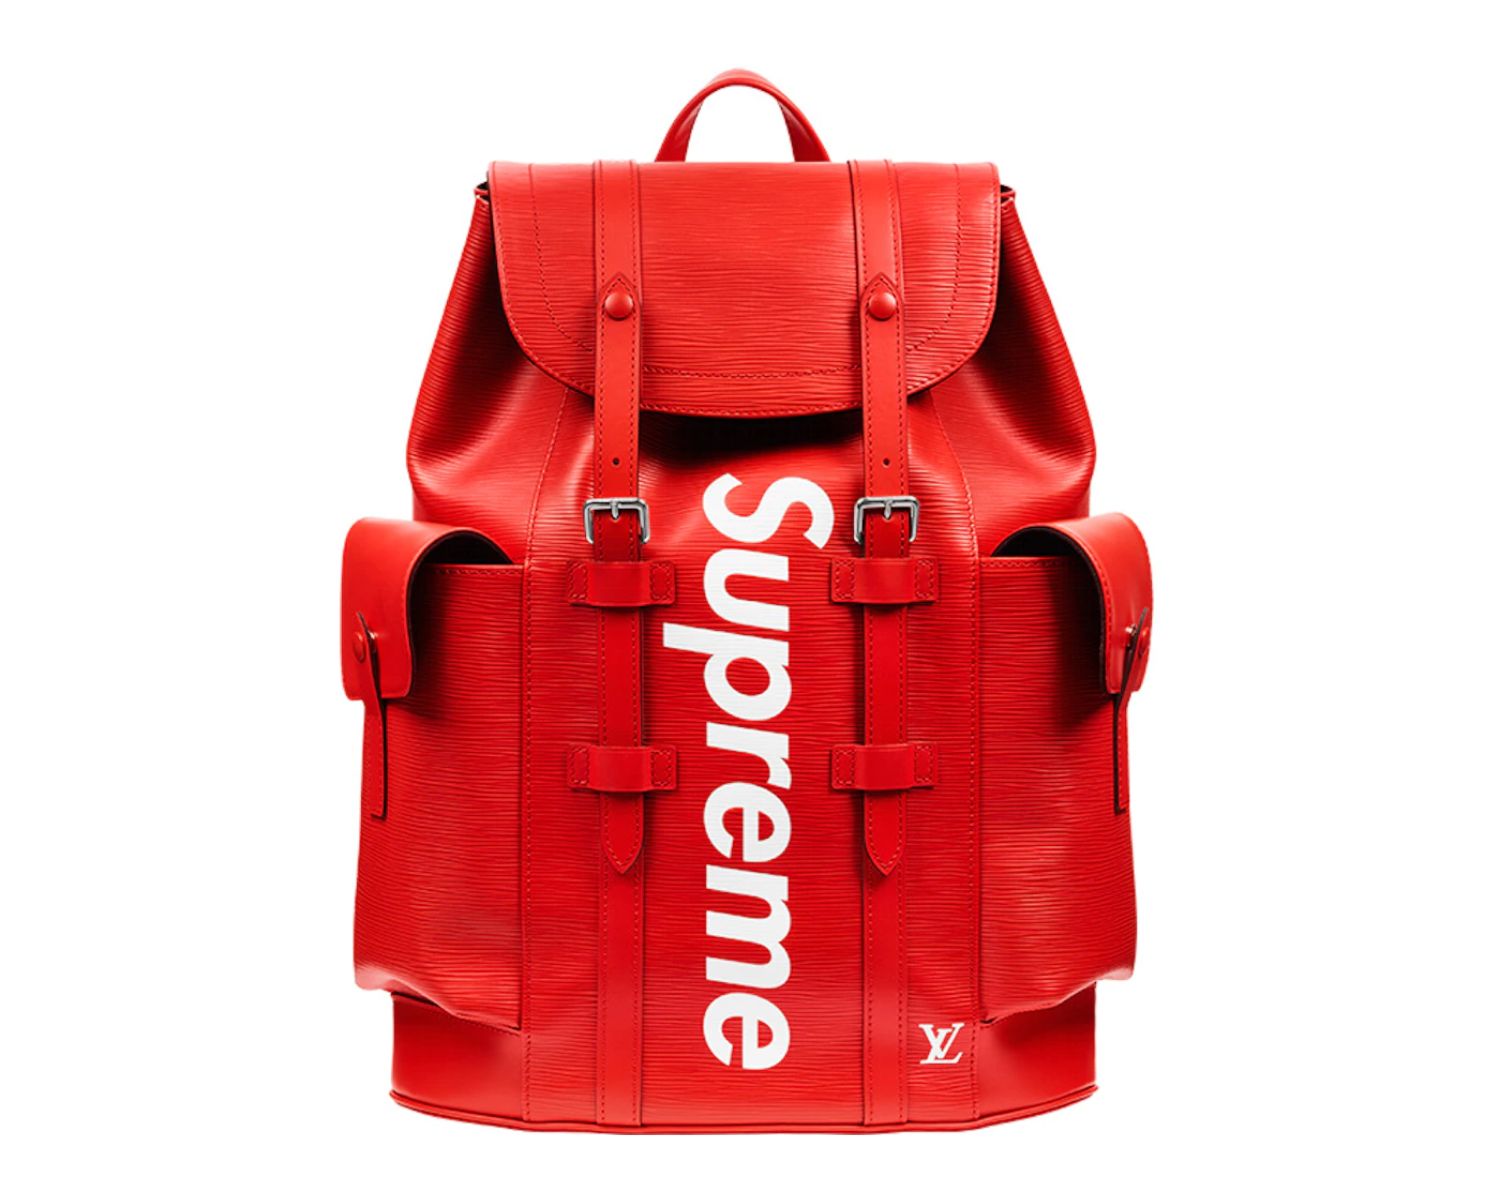 14-captivating-facts-about-supreme-backpack